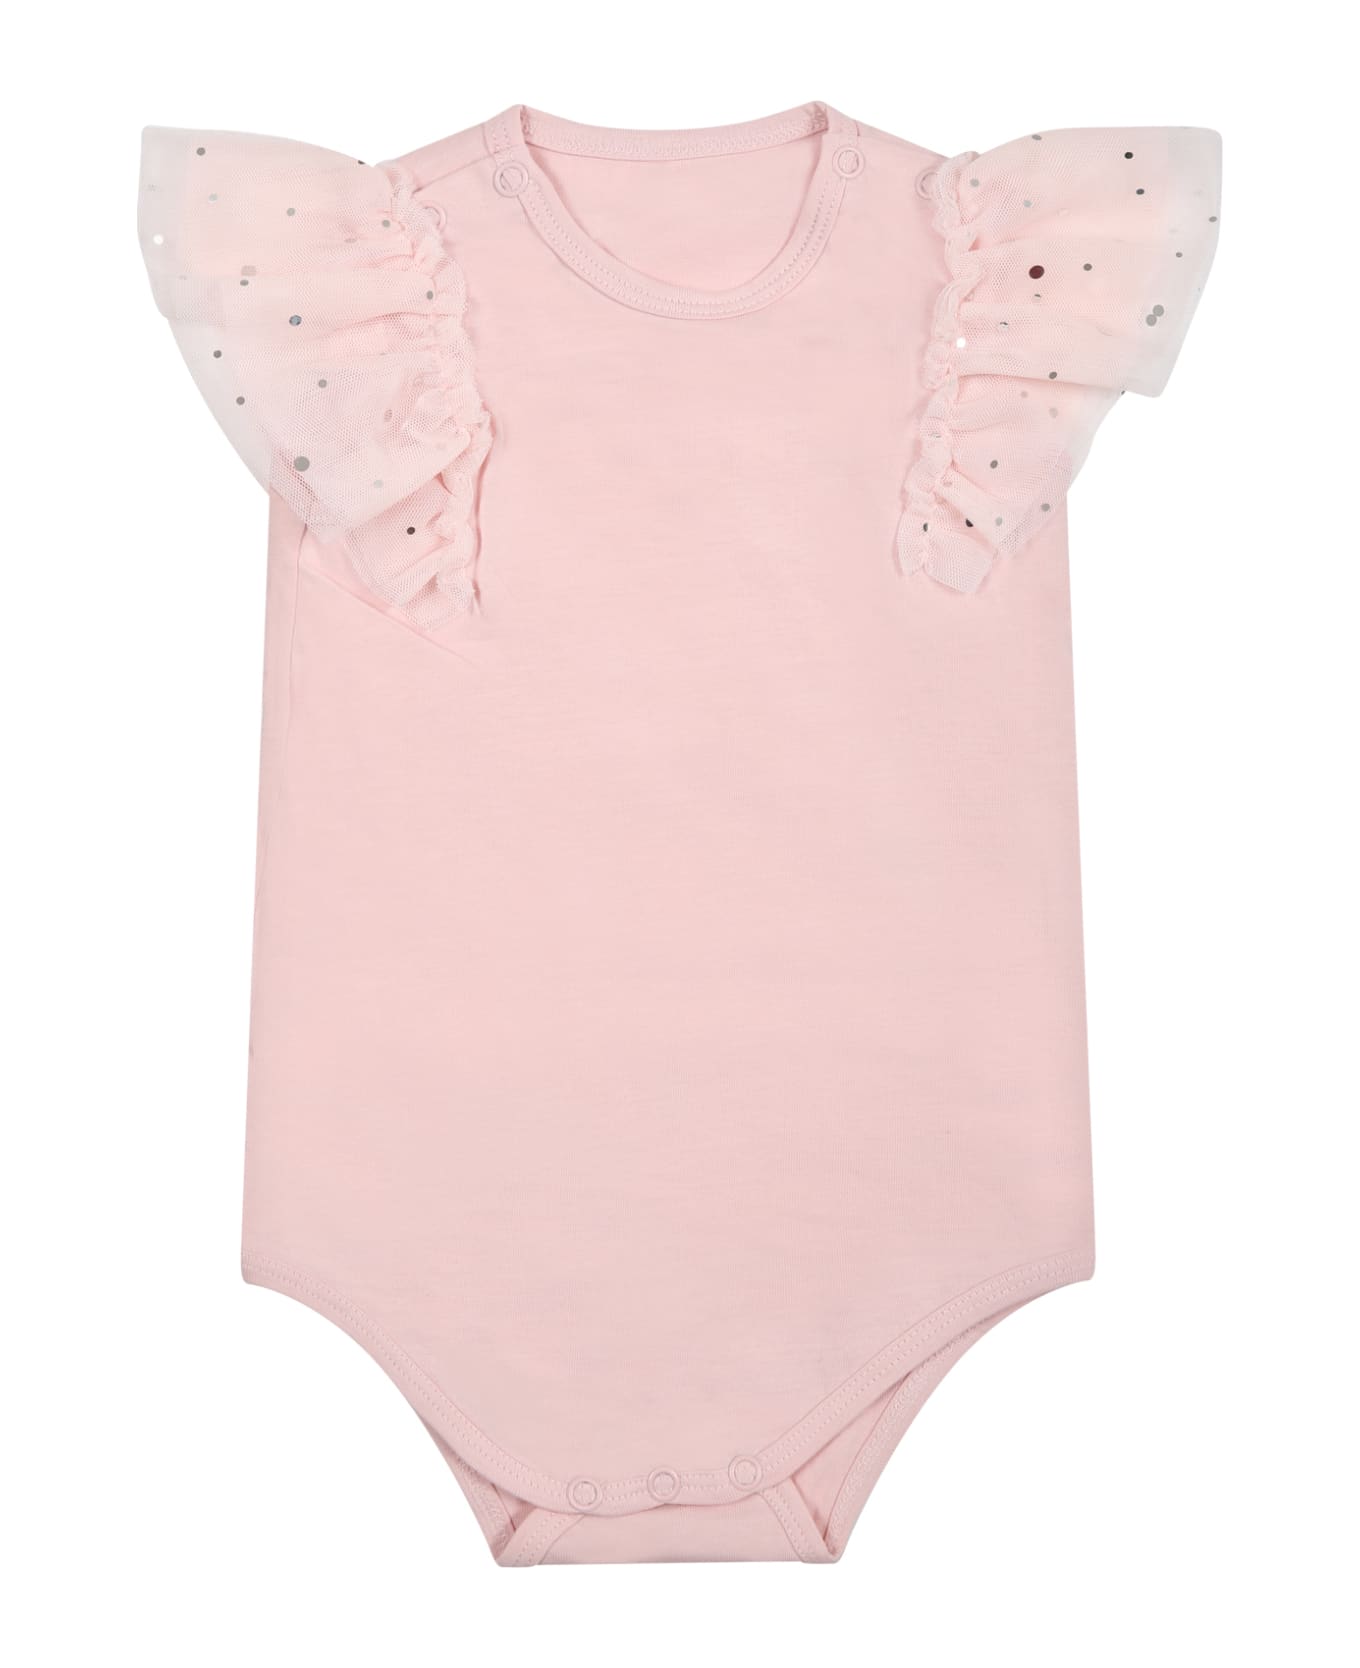 Stella donna McCartney Kids Pink Bodysuit For Baby Girl With checked - Pink